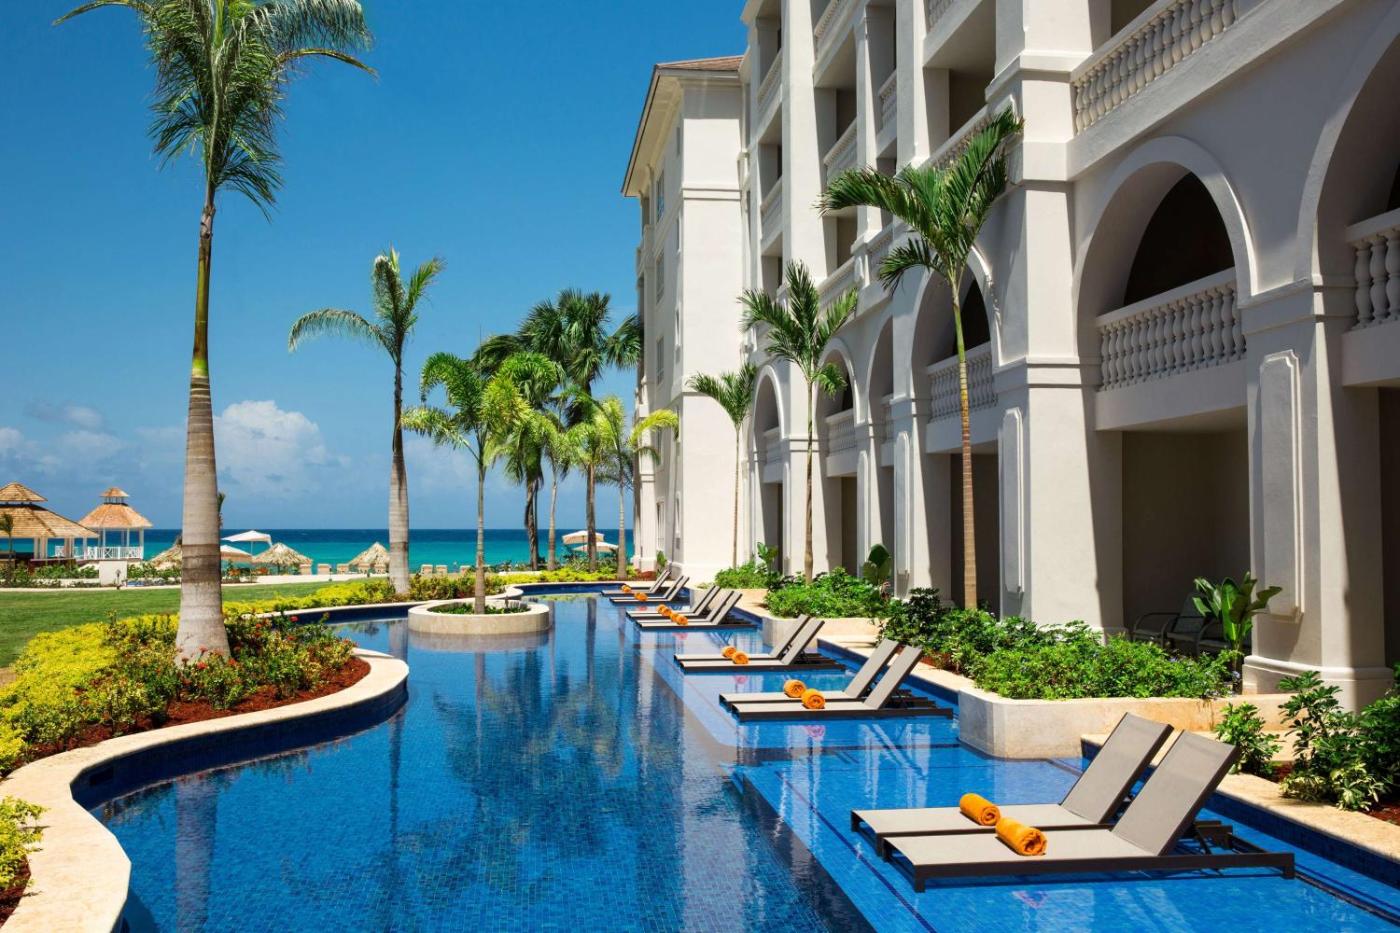 Hotel with private pool - Hyatt Ziva Rose Hall - All Inclusive